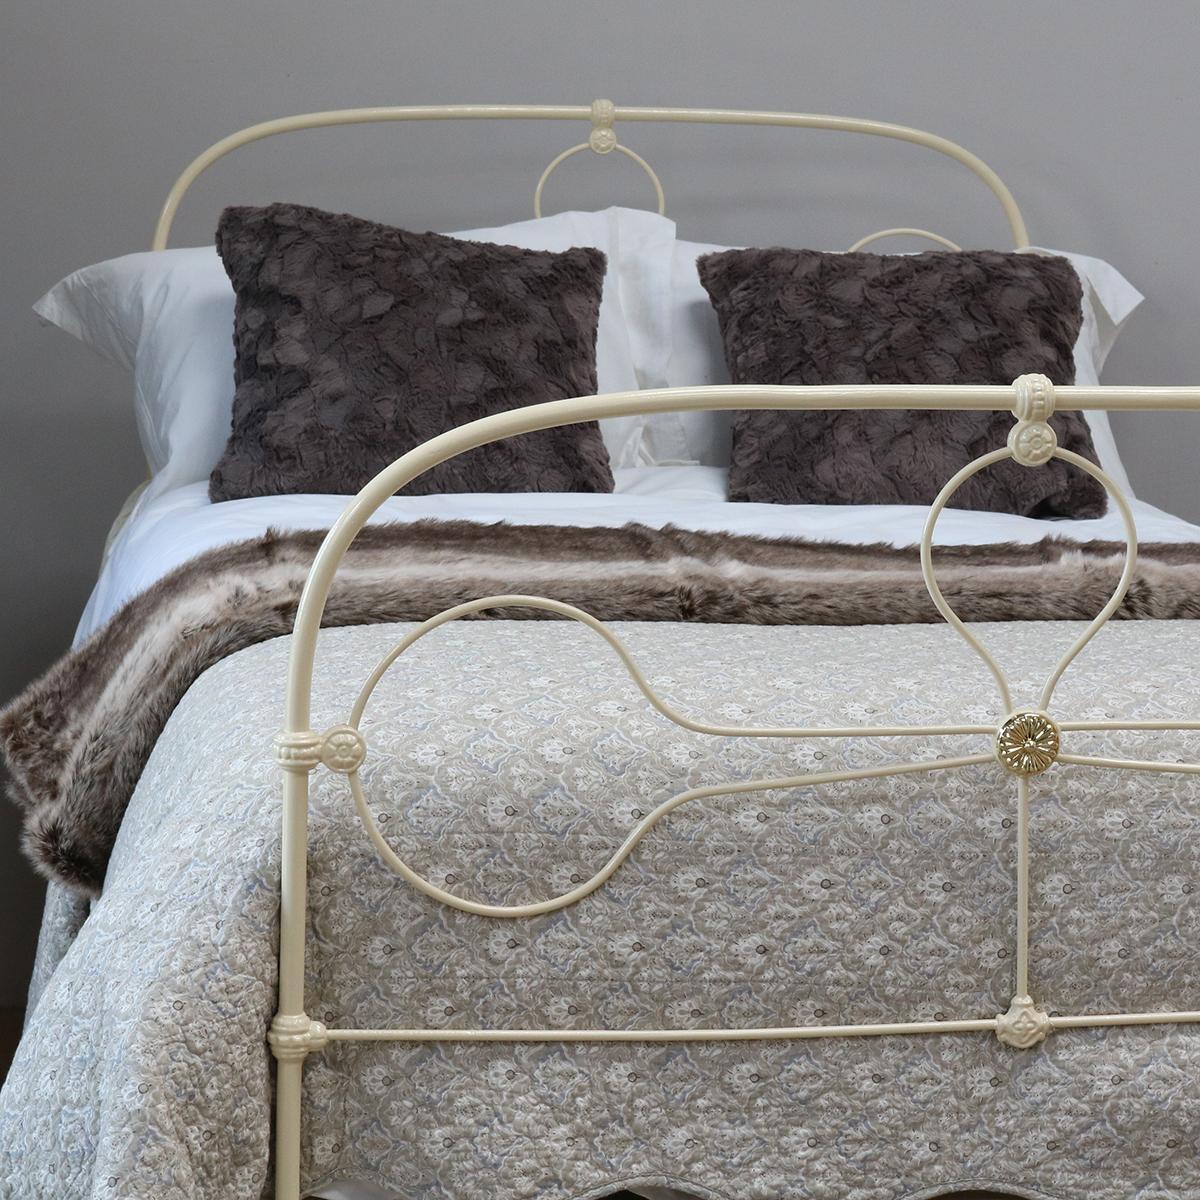 Cream antique bed with simple arched design and central brass rosette.

This bed accepts a small double size (4ft wide, 48 inches or 120cm) base and mattress set.

The price includes a standard firm bed base to support the mattress. 

The mattress,